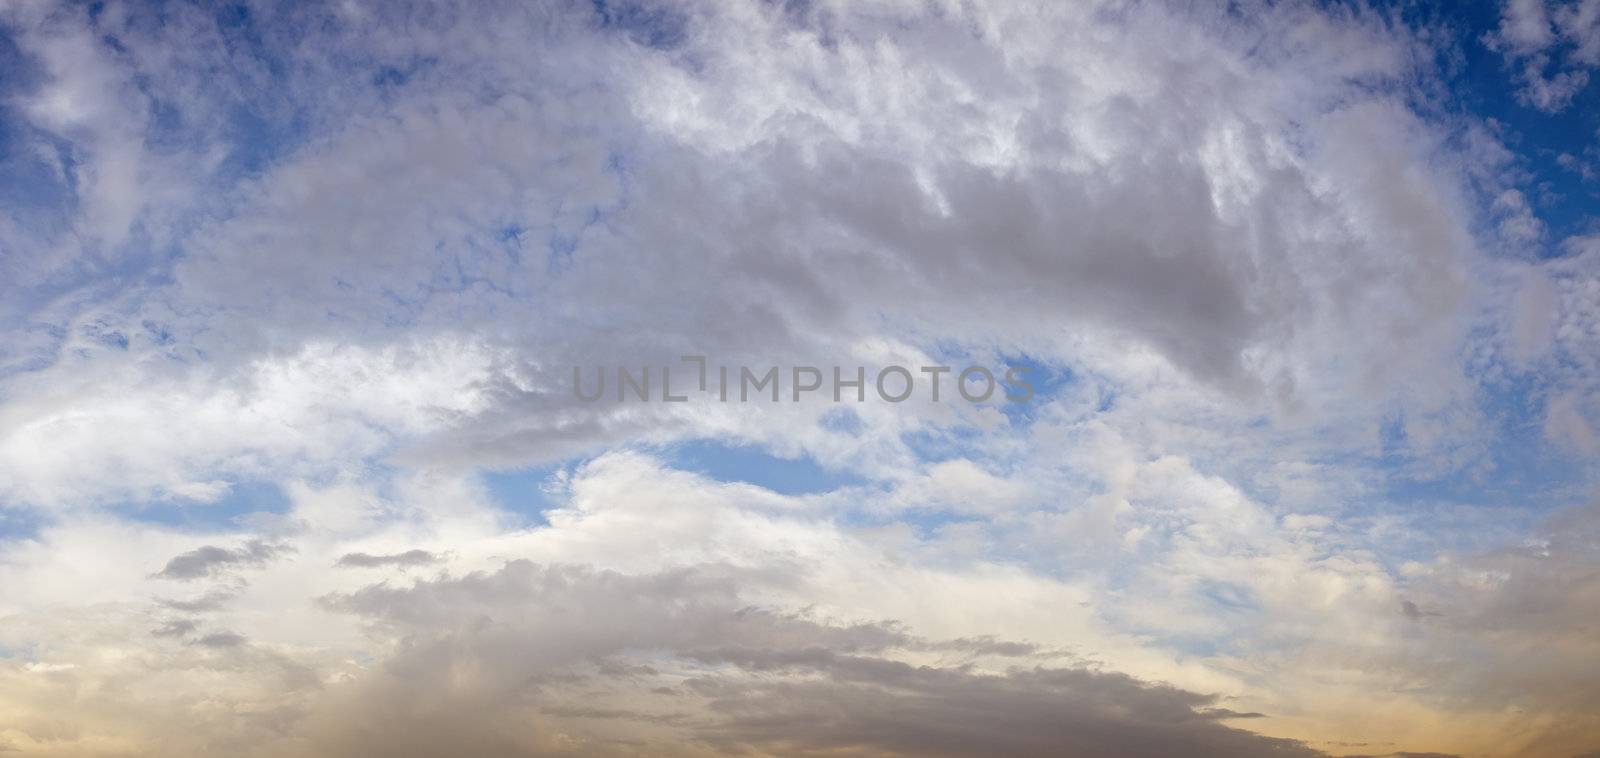 Cloudy sky panorama by milinz